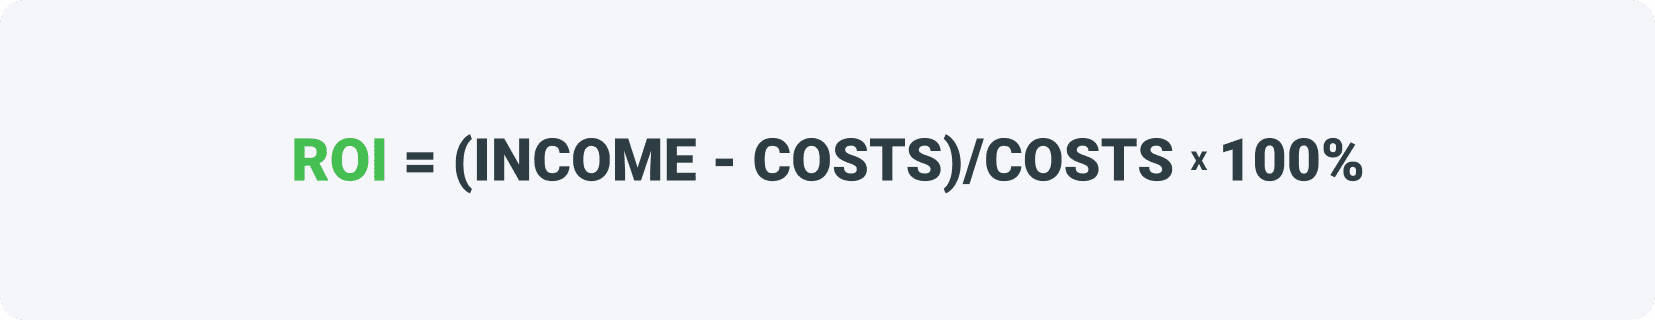 ROI = (INCOME - COSTS)/COSTS X 100%